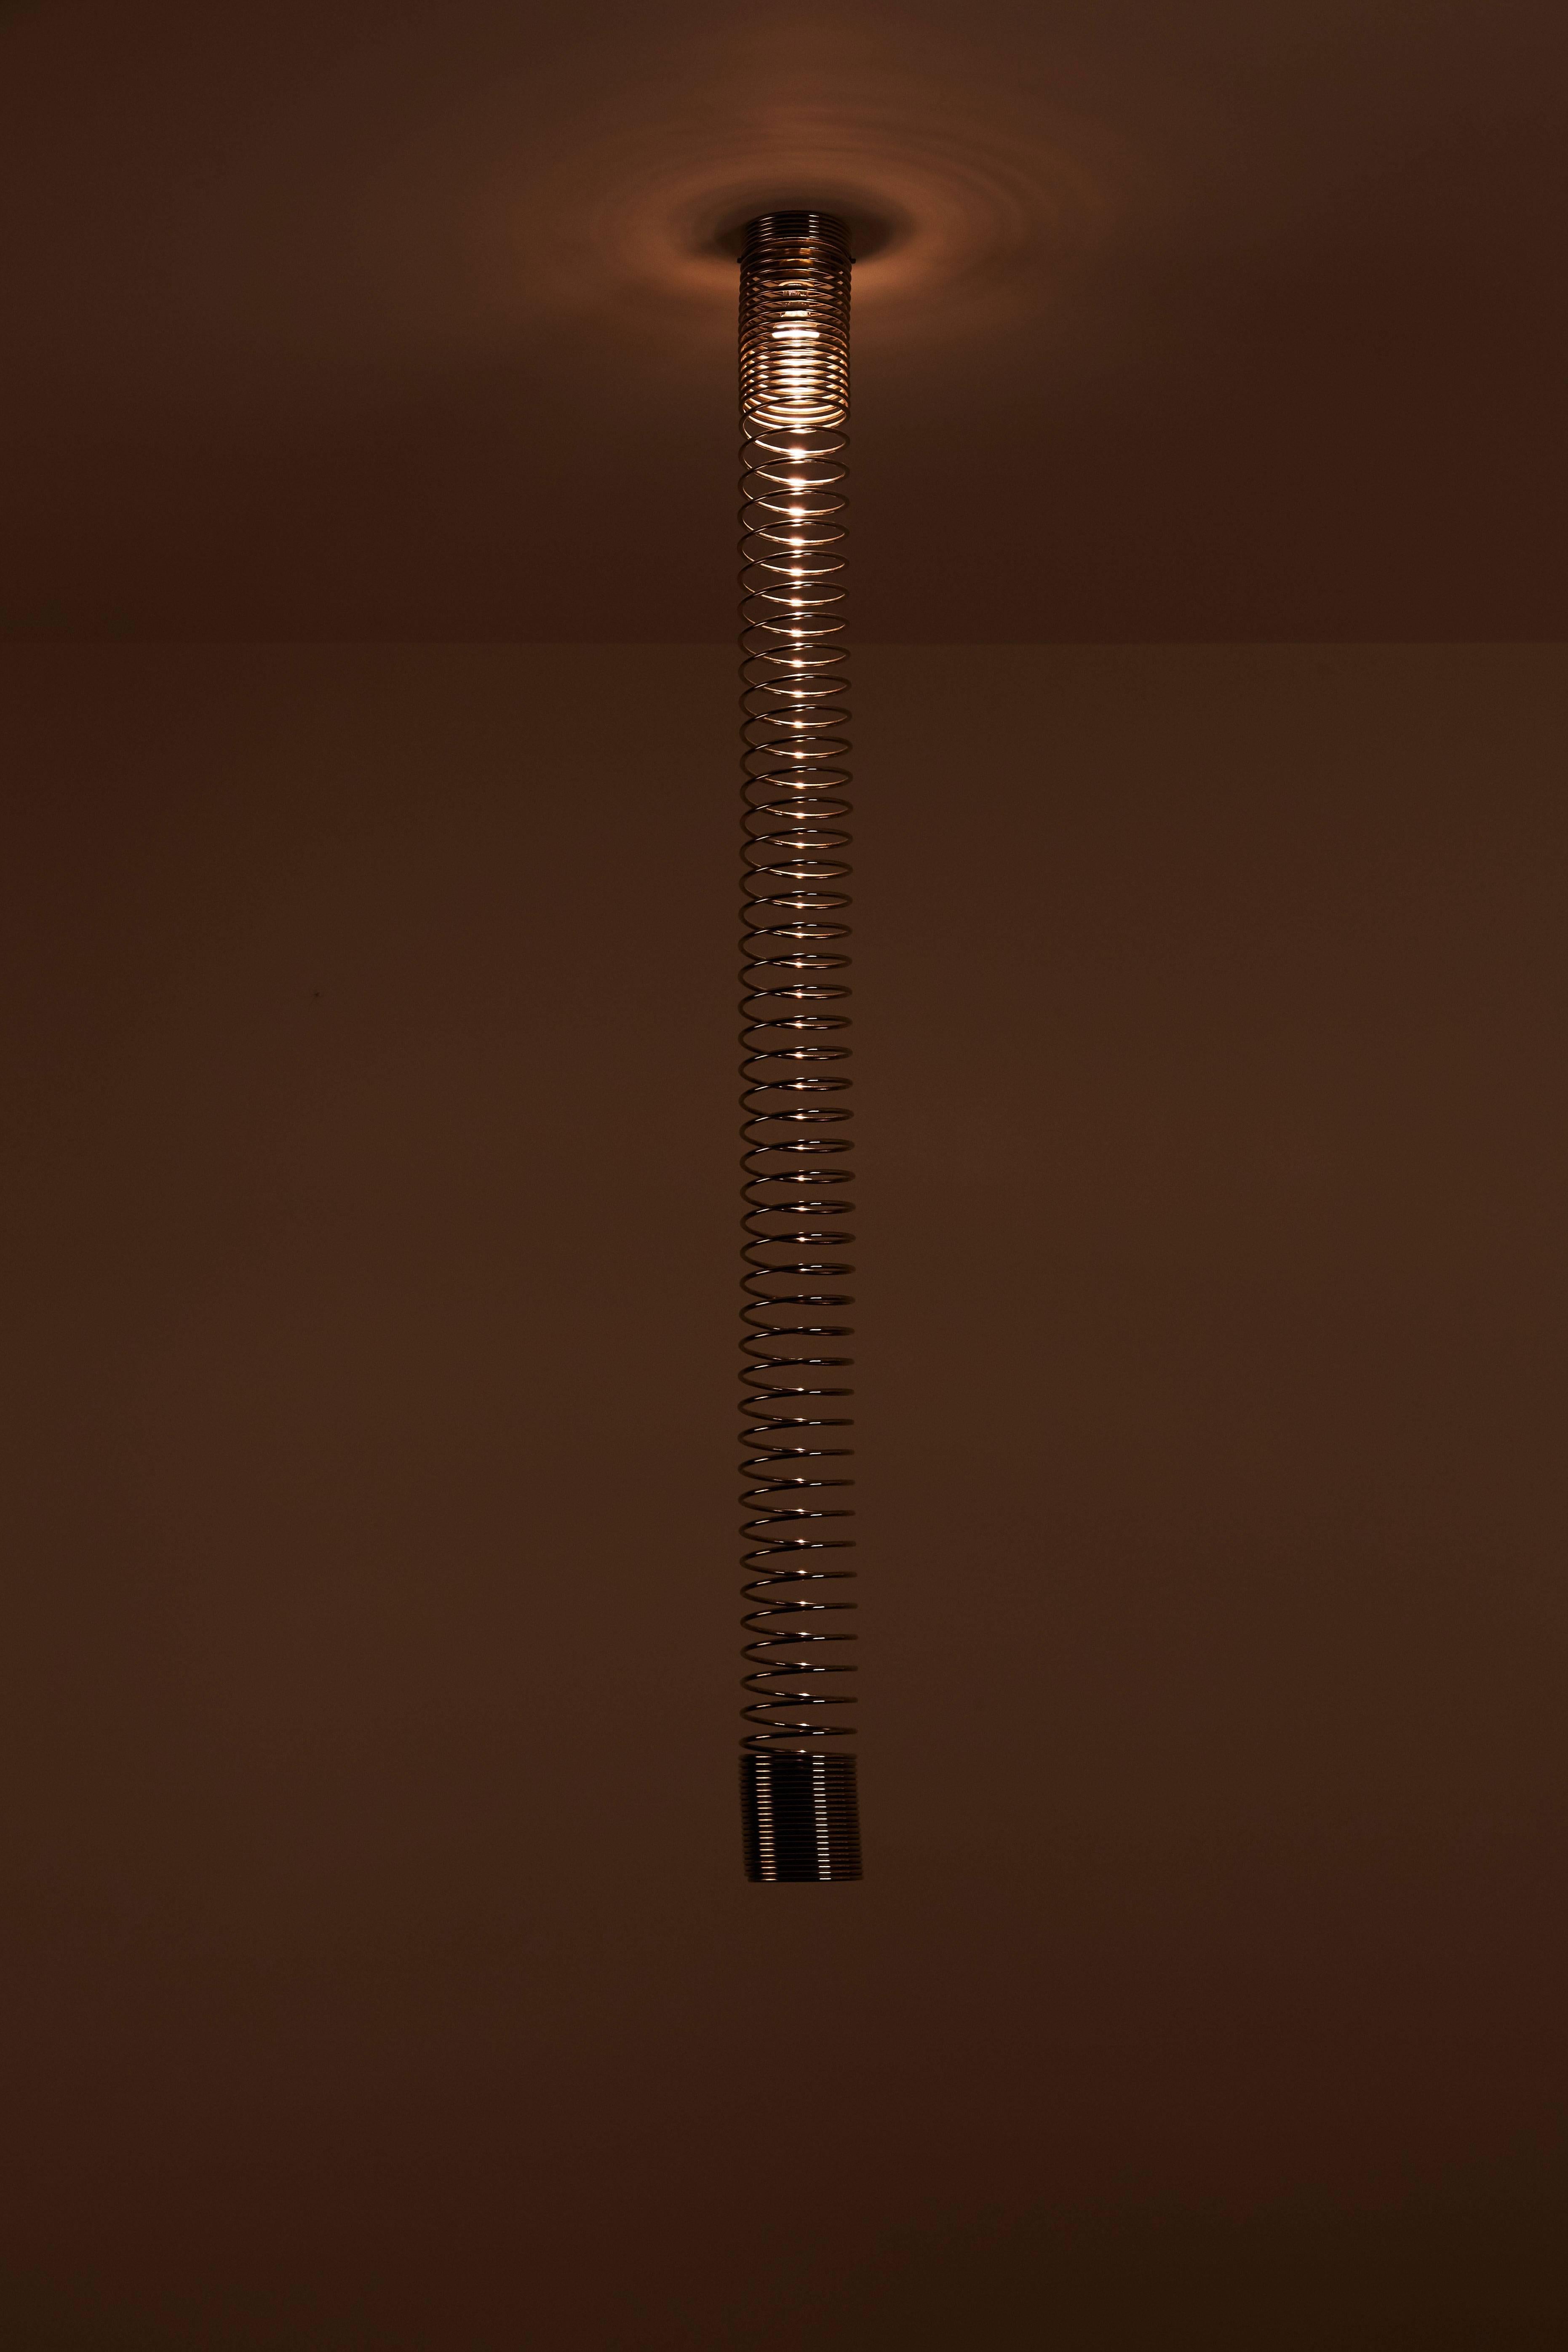 Chromed steel spiral pendants by Angelo Mangiarotti. Each light has a single E27 socket type, adapted for US standards. Recommended 40-60w max or LED equivalent.

See listing image for sizes and inquire with Rewire on availability upon purchasing.